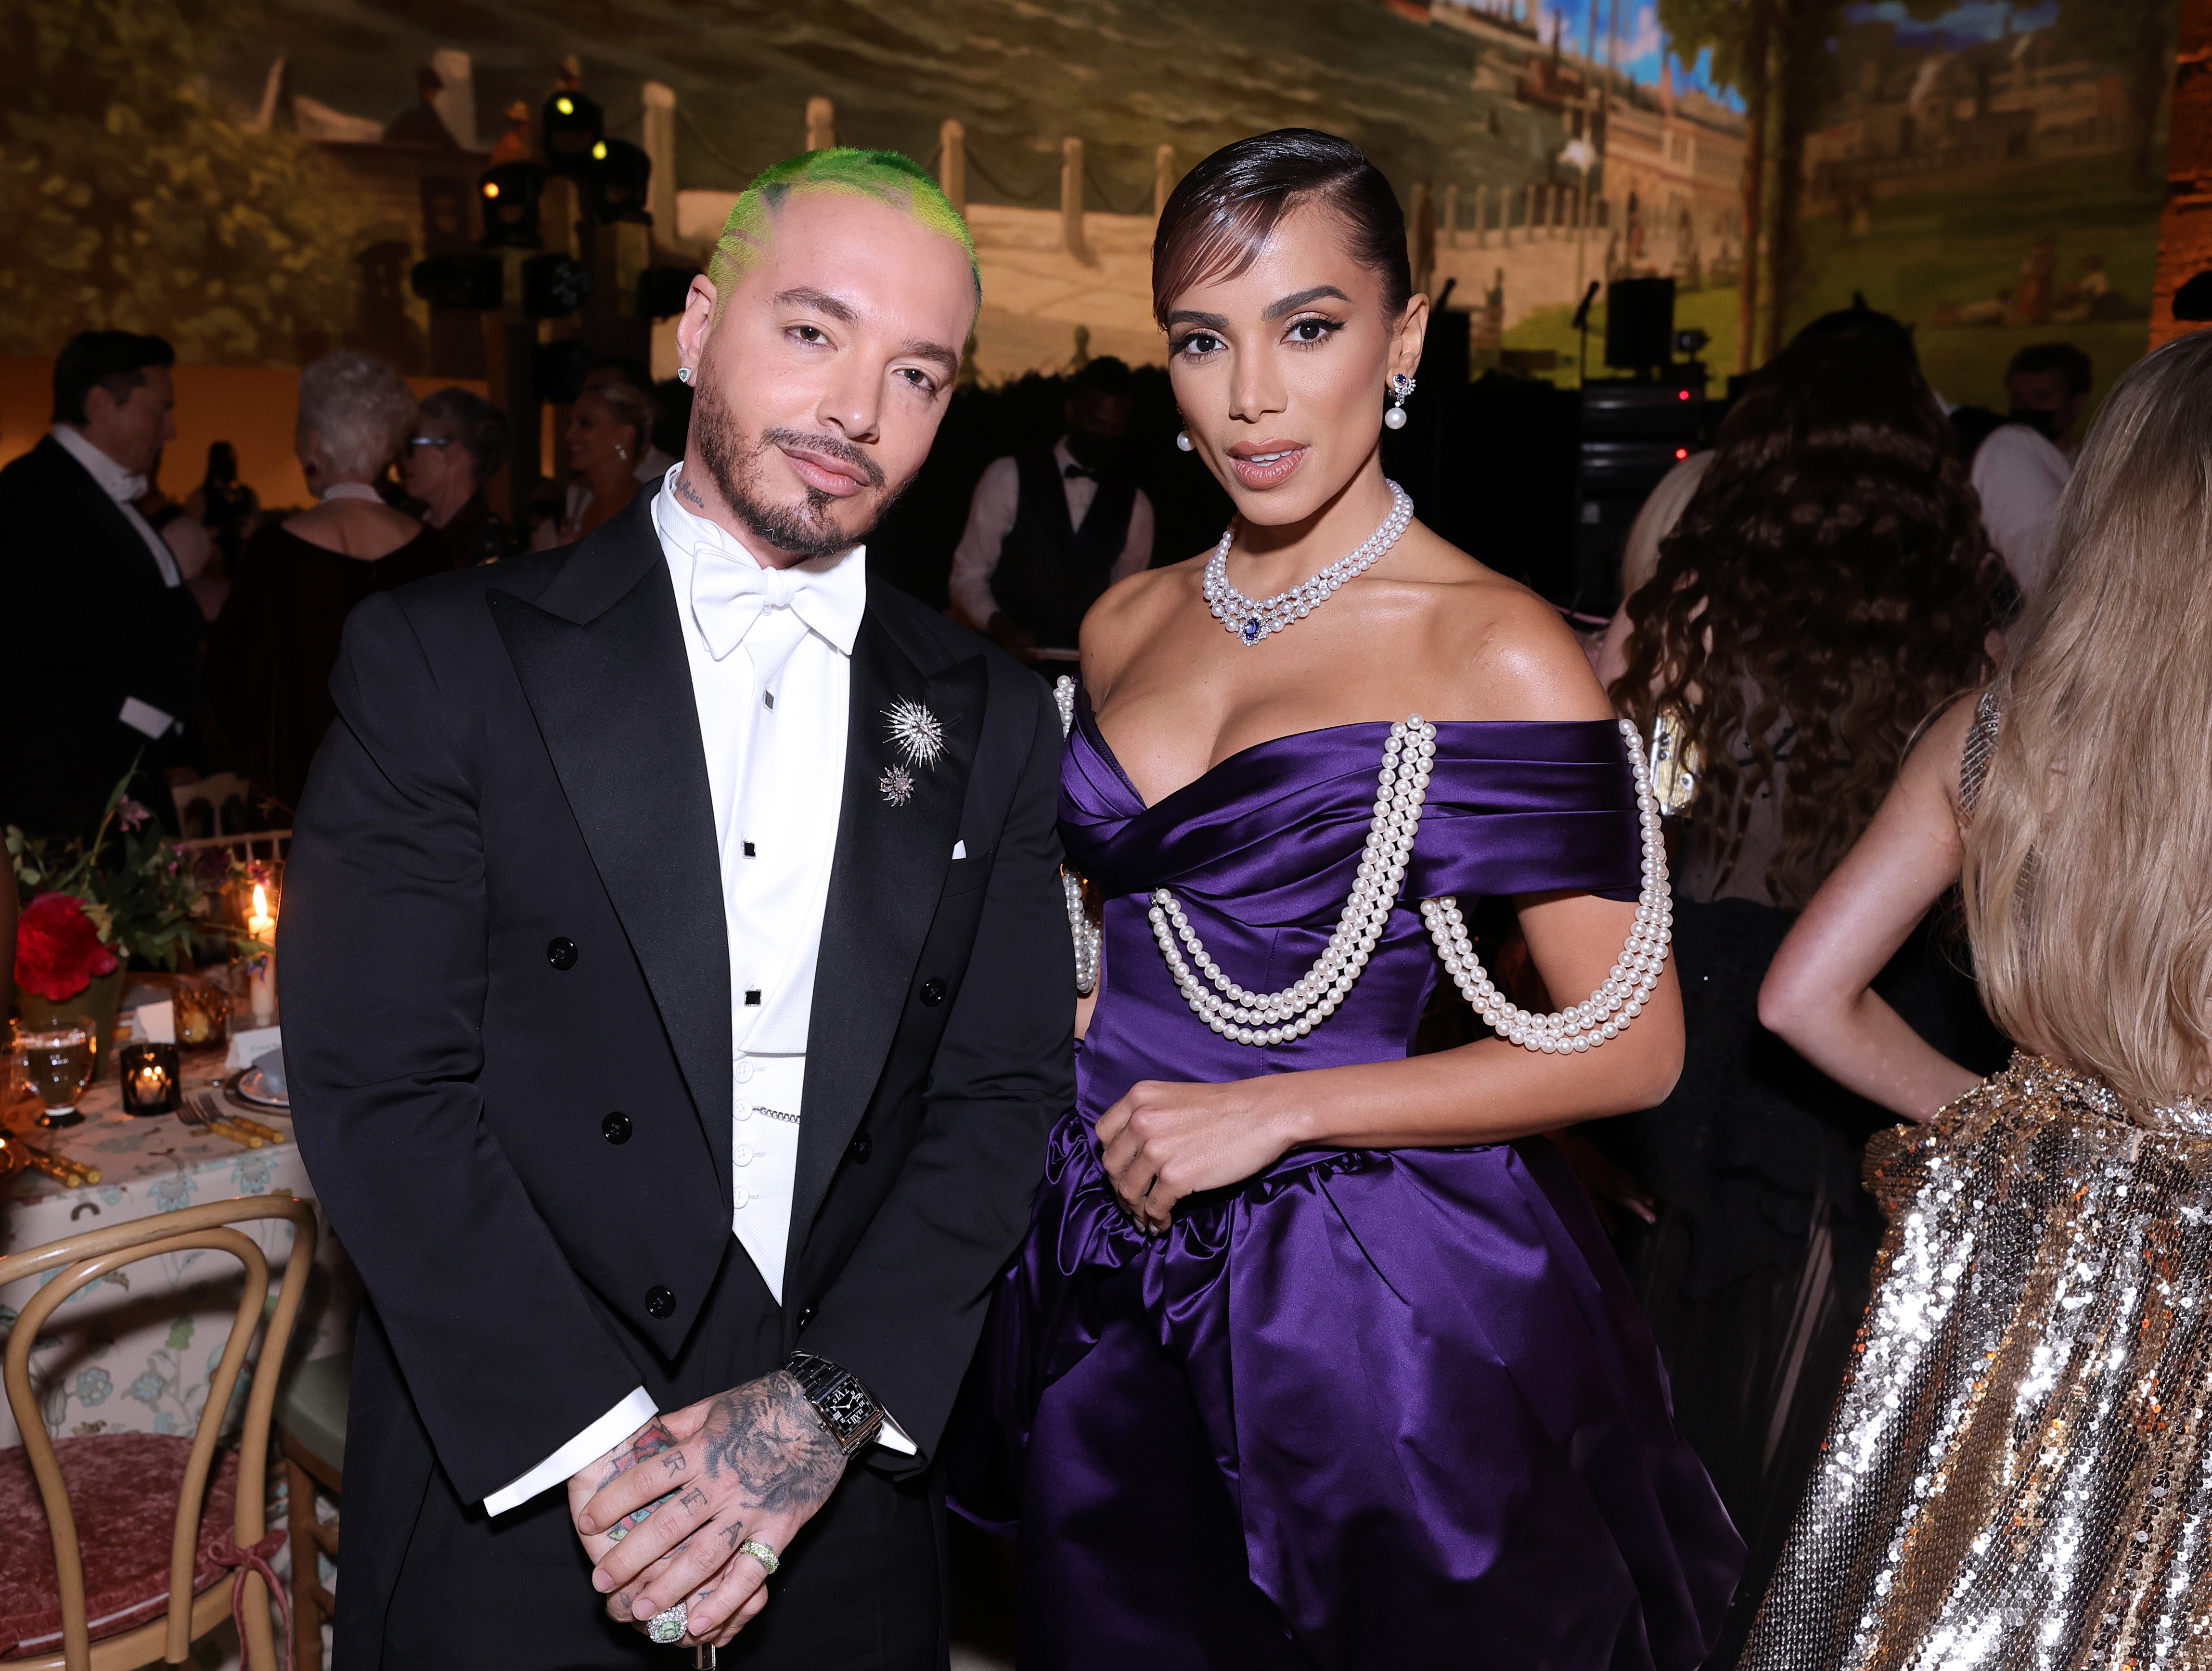 NEW YORK, NEW YORK - MAY 02: (Exclusive Coverage) (L-R) J Balvin and Anitta attend The 2022 Met Gala Celebrating "In America: An Anthology of Fashion" at The Metropolitan Museum of Art on May 02, 2022 in New York City. (Photo by Matt Winkelmeyer/MG22/Gett (Foto: Getty Images for The Met Museum/)